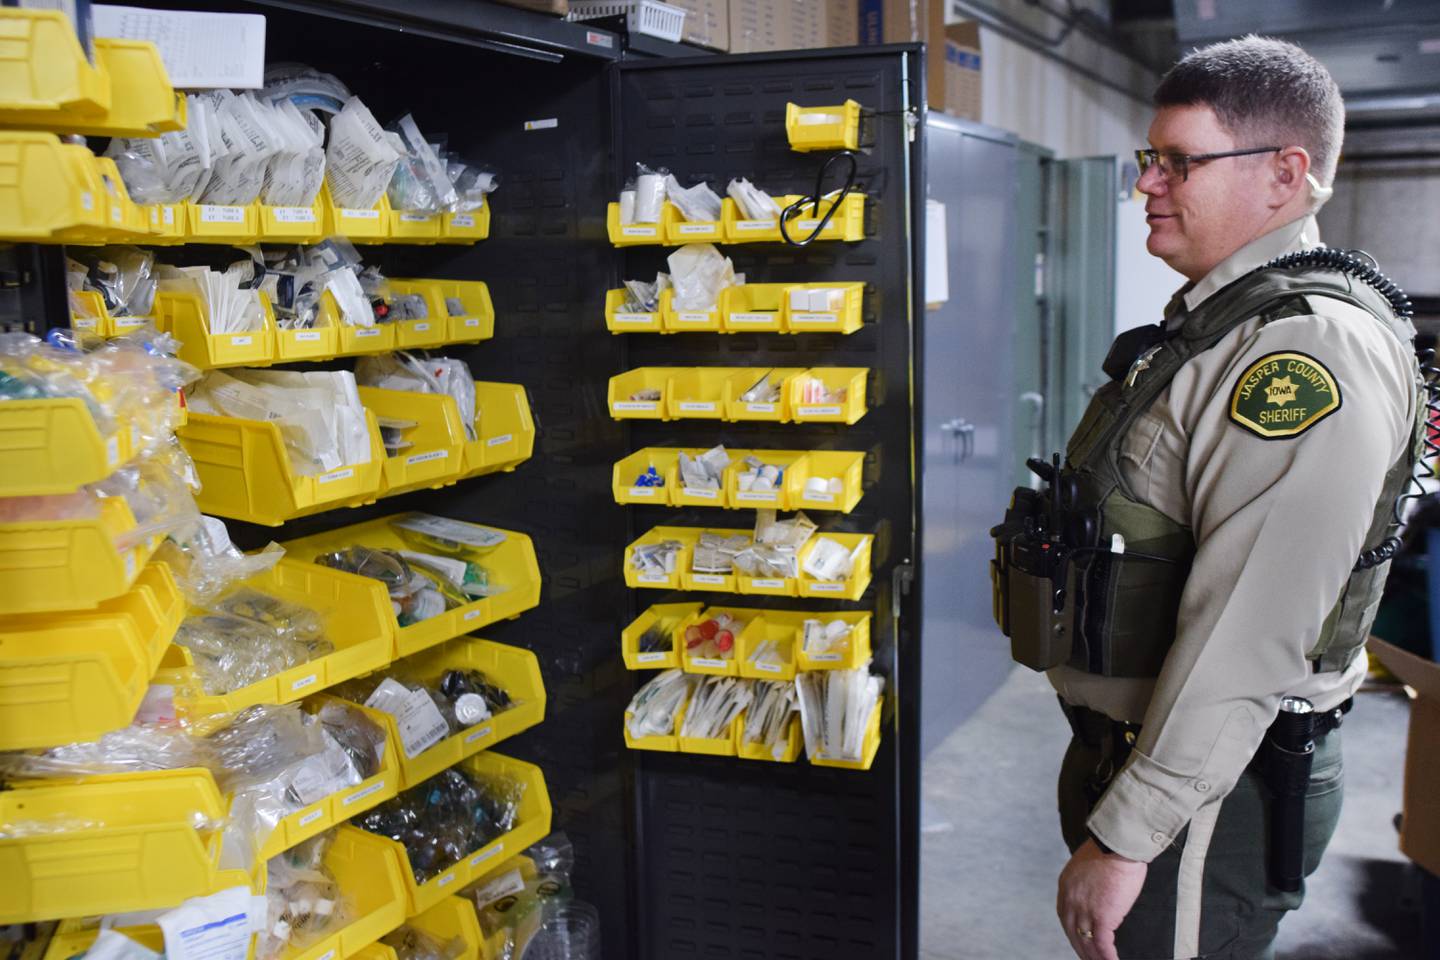 Steve Ashing, a reserve deputy paramedic for the Jasper County Sheriff's Office, showcases the extra medical supplies and equipment the sheriff's office routinely fills. Ashing is part of the advanced life support pilot program at the sheriff's office, which allows part-time reserve deputies with paramedic-level training to respond to emergency calls in rural areas and assist volunteer agencies.